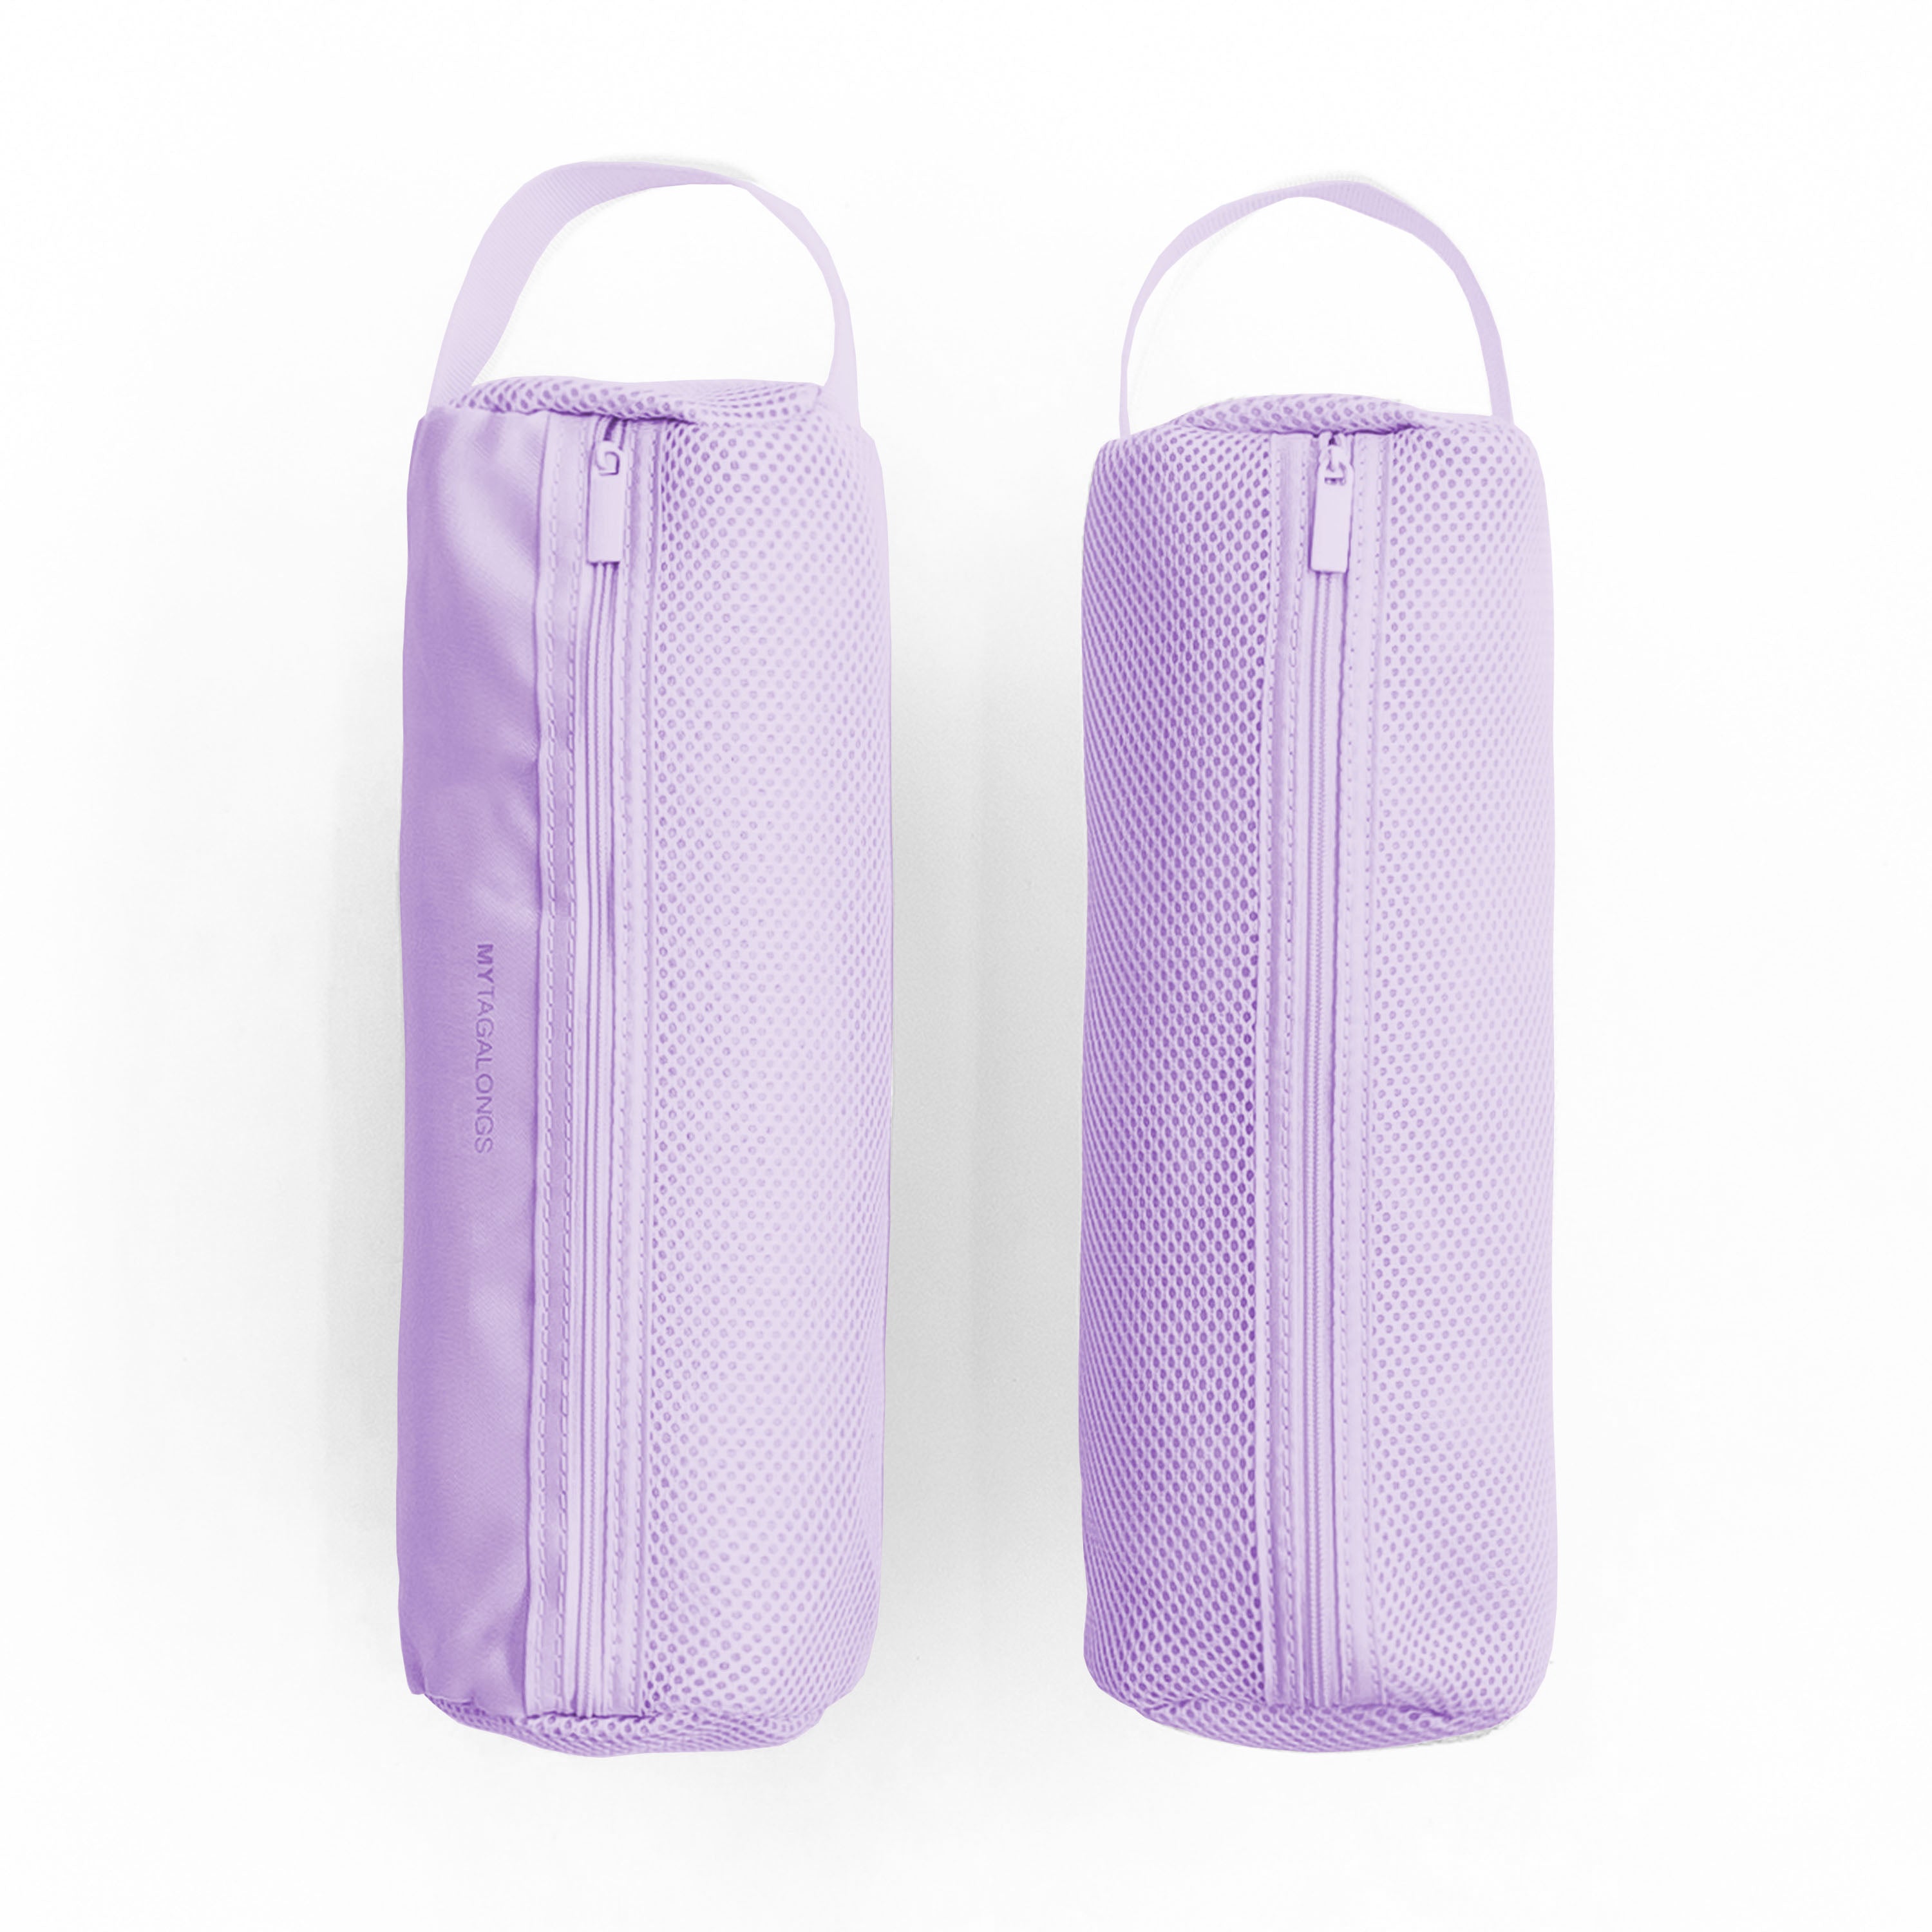 purple lilac Cylinder packing bag with mesh side